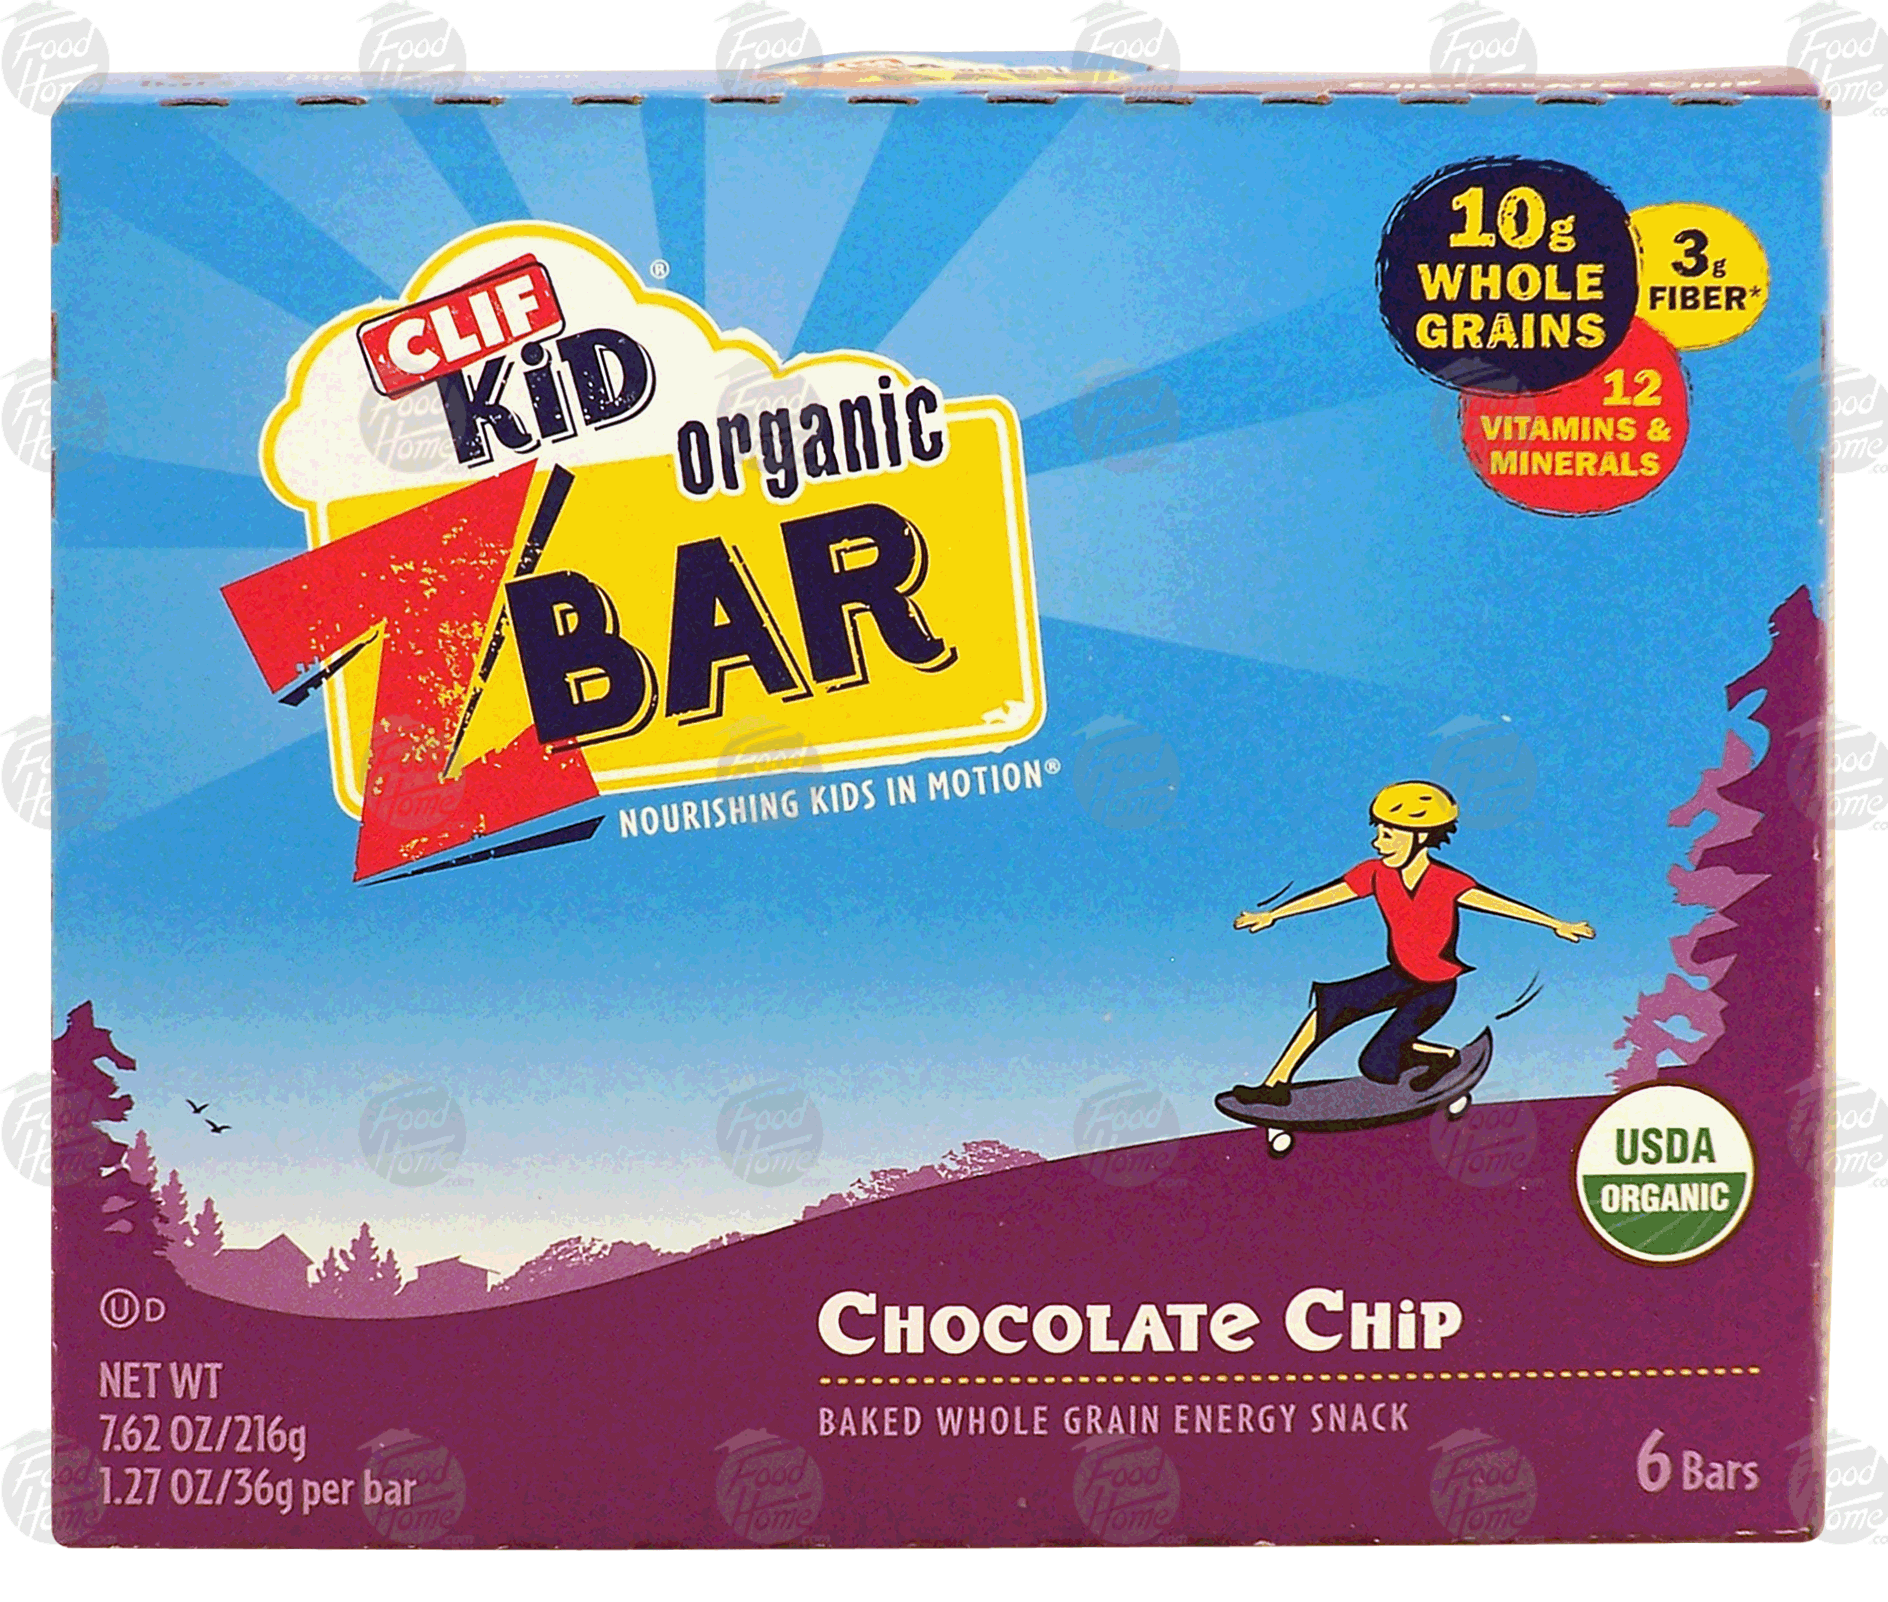 Clif Kid Z Bar organic chocolate chip baked whole grain energy snack, 6 bars Full-Size Picture